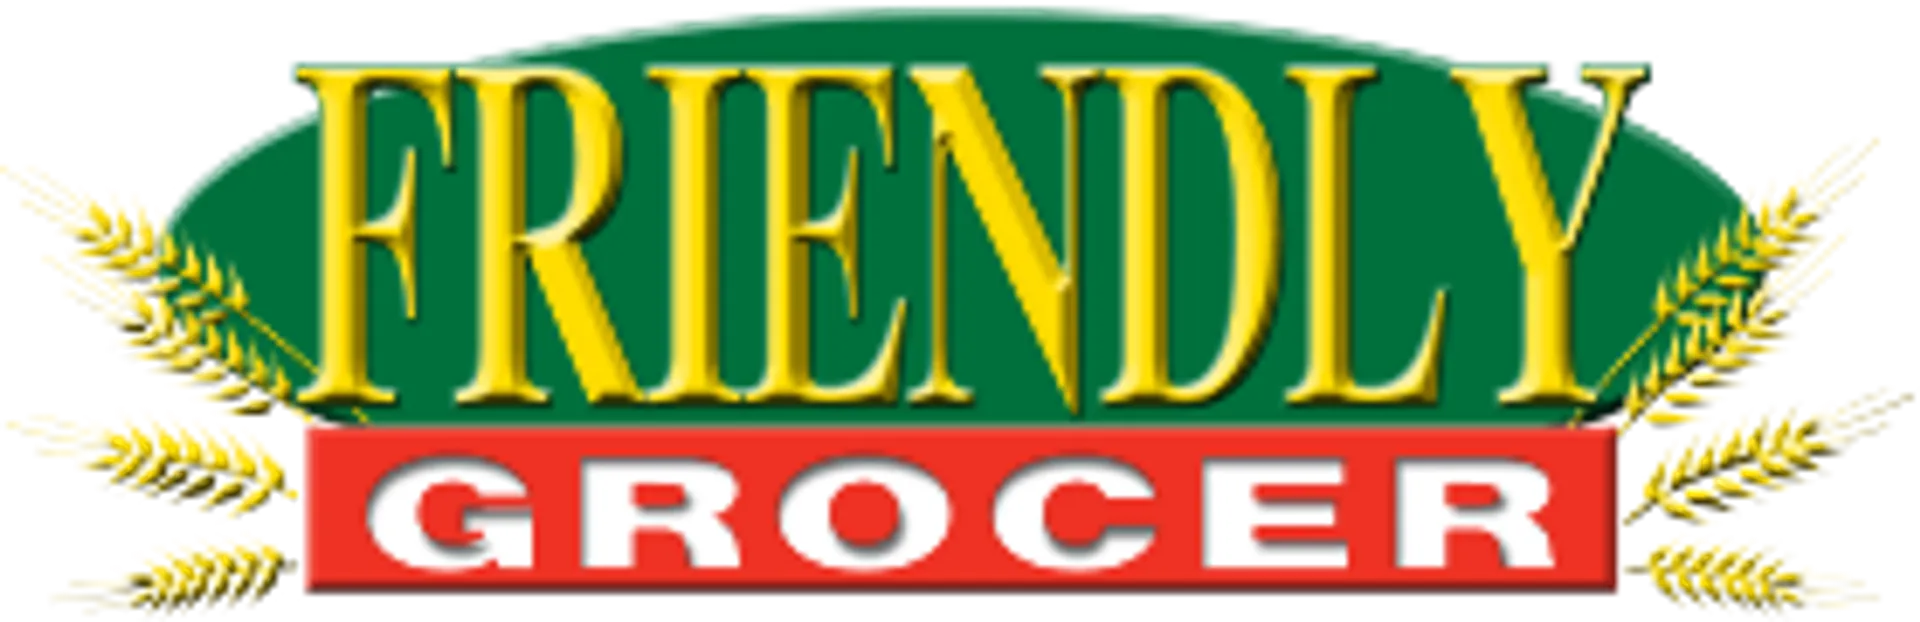 FRIENDLY GROCER logo of current catalogue